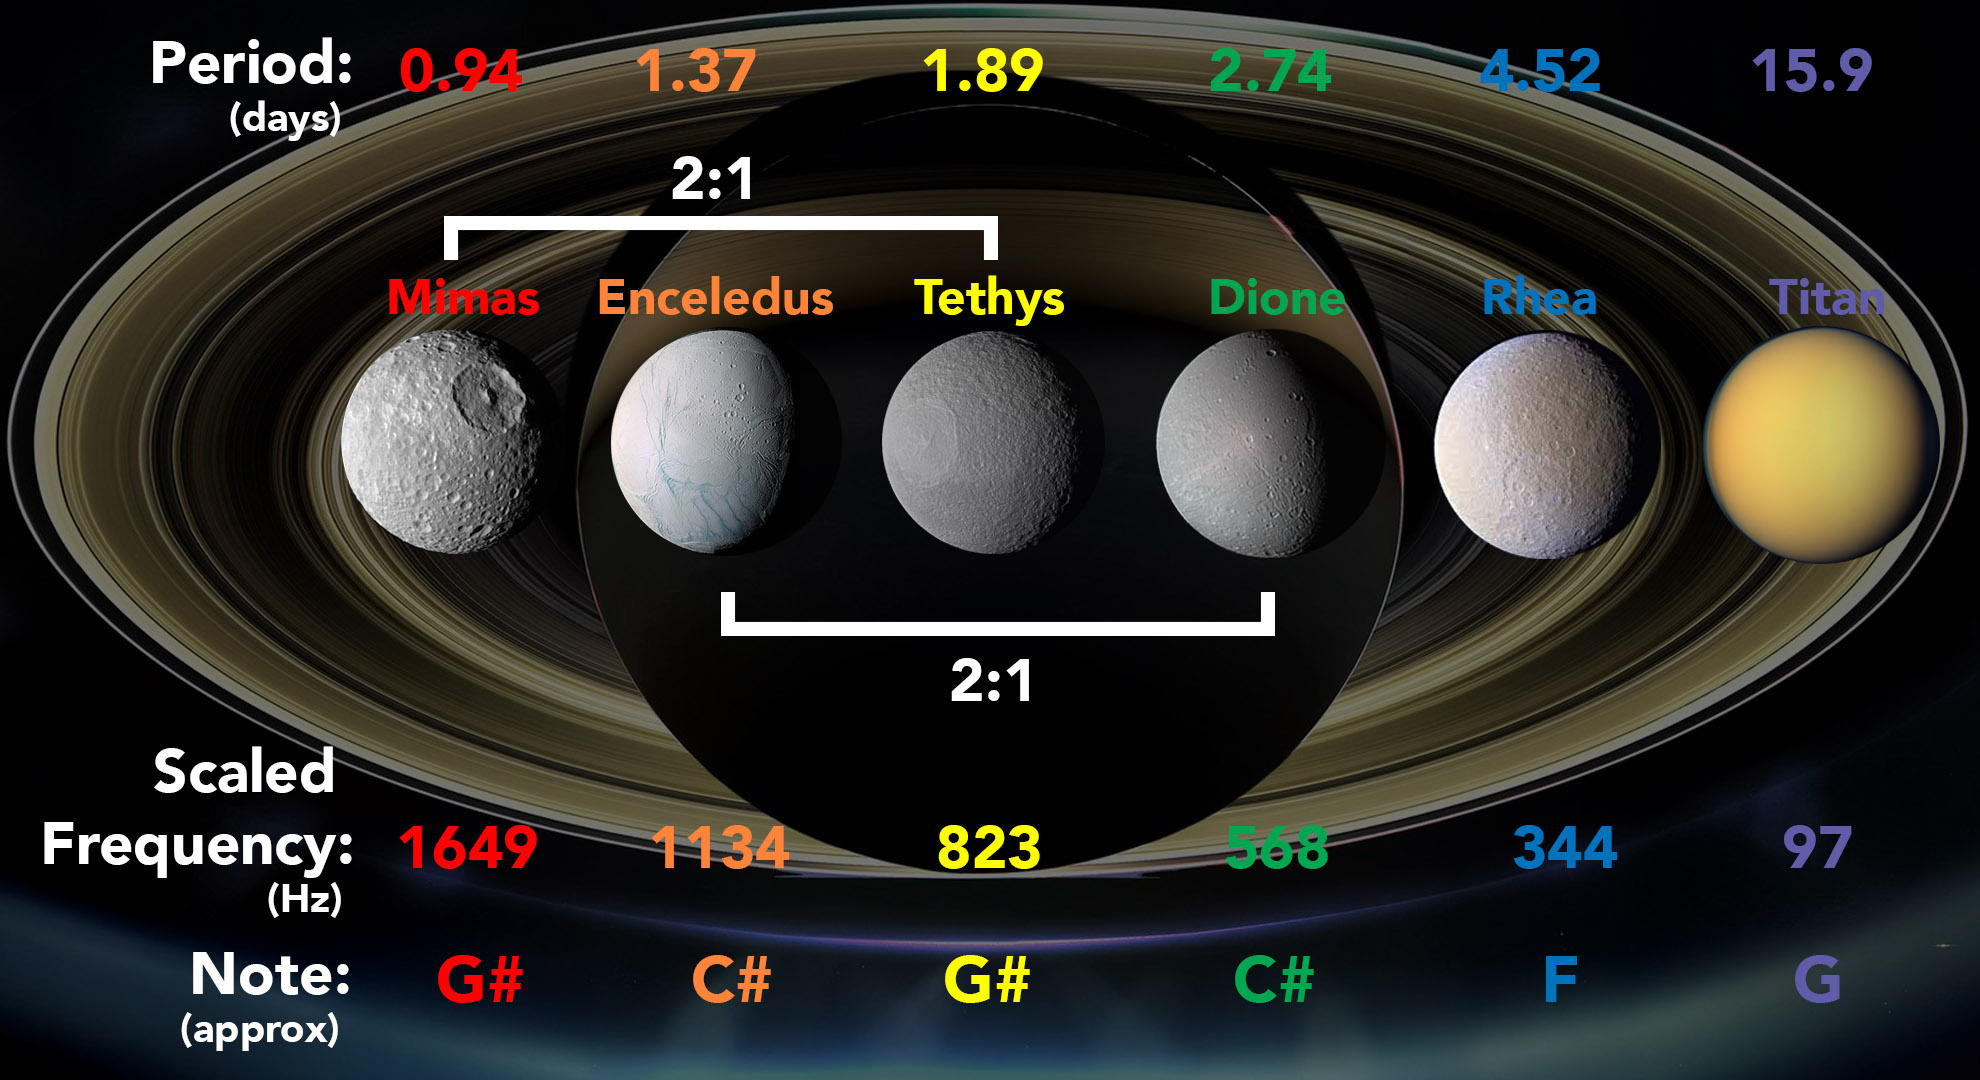 The orbital periods, scaled frequencies, and musical notes of Saturn's major moons. The frequencies have been increased by 27 octaves from their true values so they can be heard by human ears. (Credit: SYSTEM Sounds/NASA/JPL-Caltech/Elisabetta Bonora/Marco Faccin)